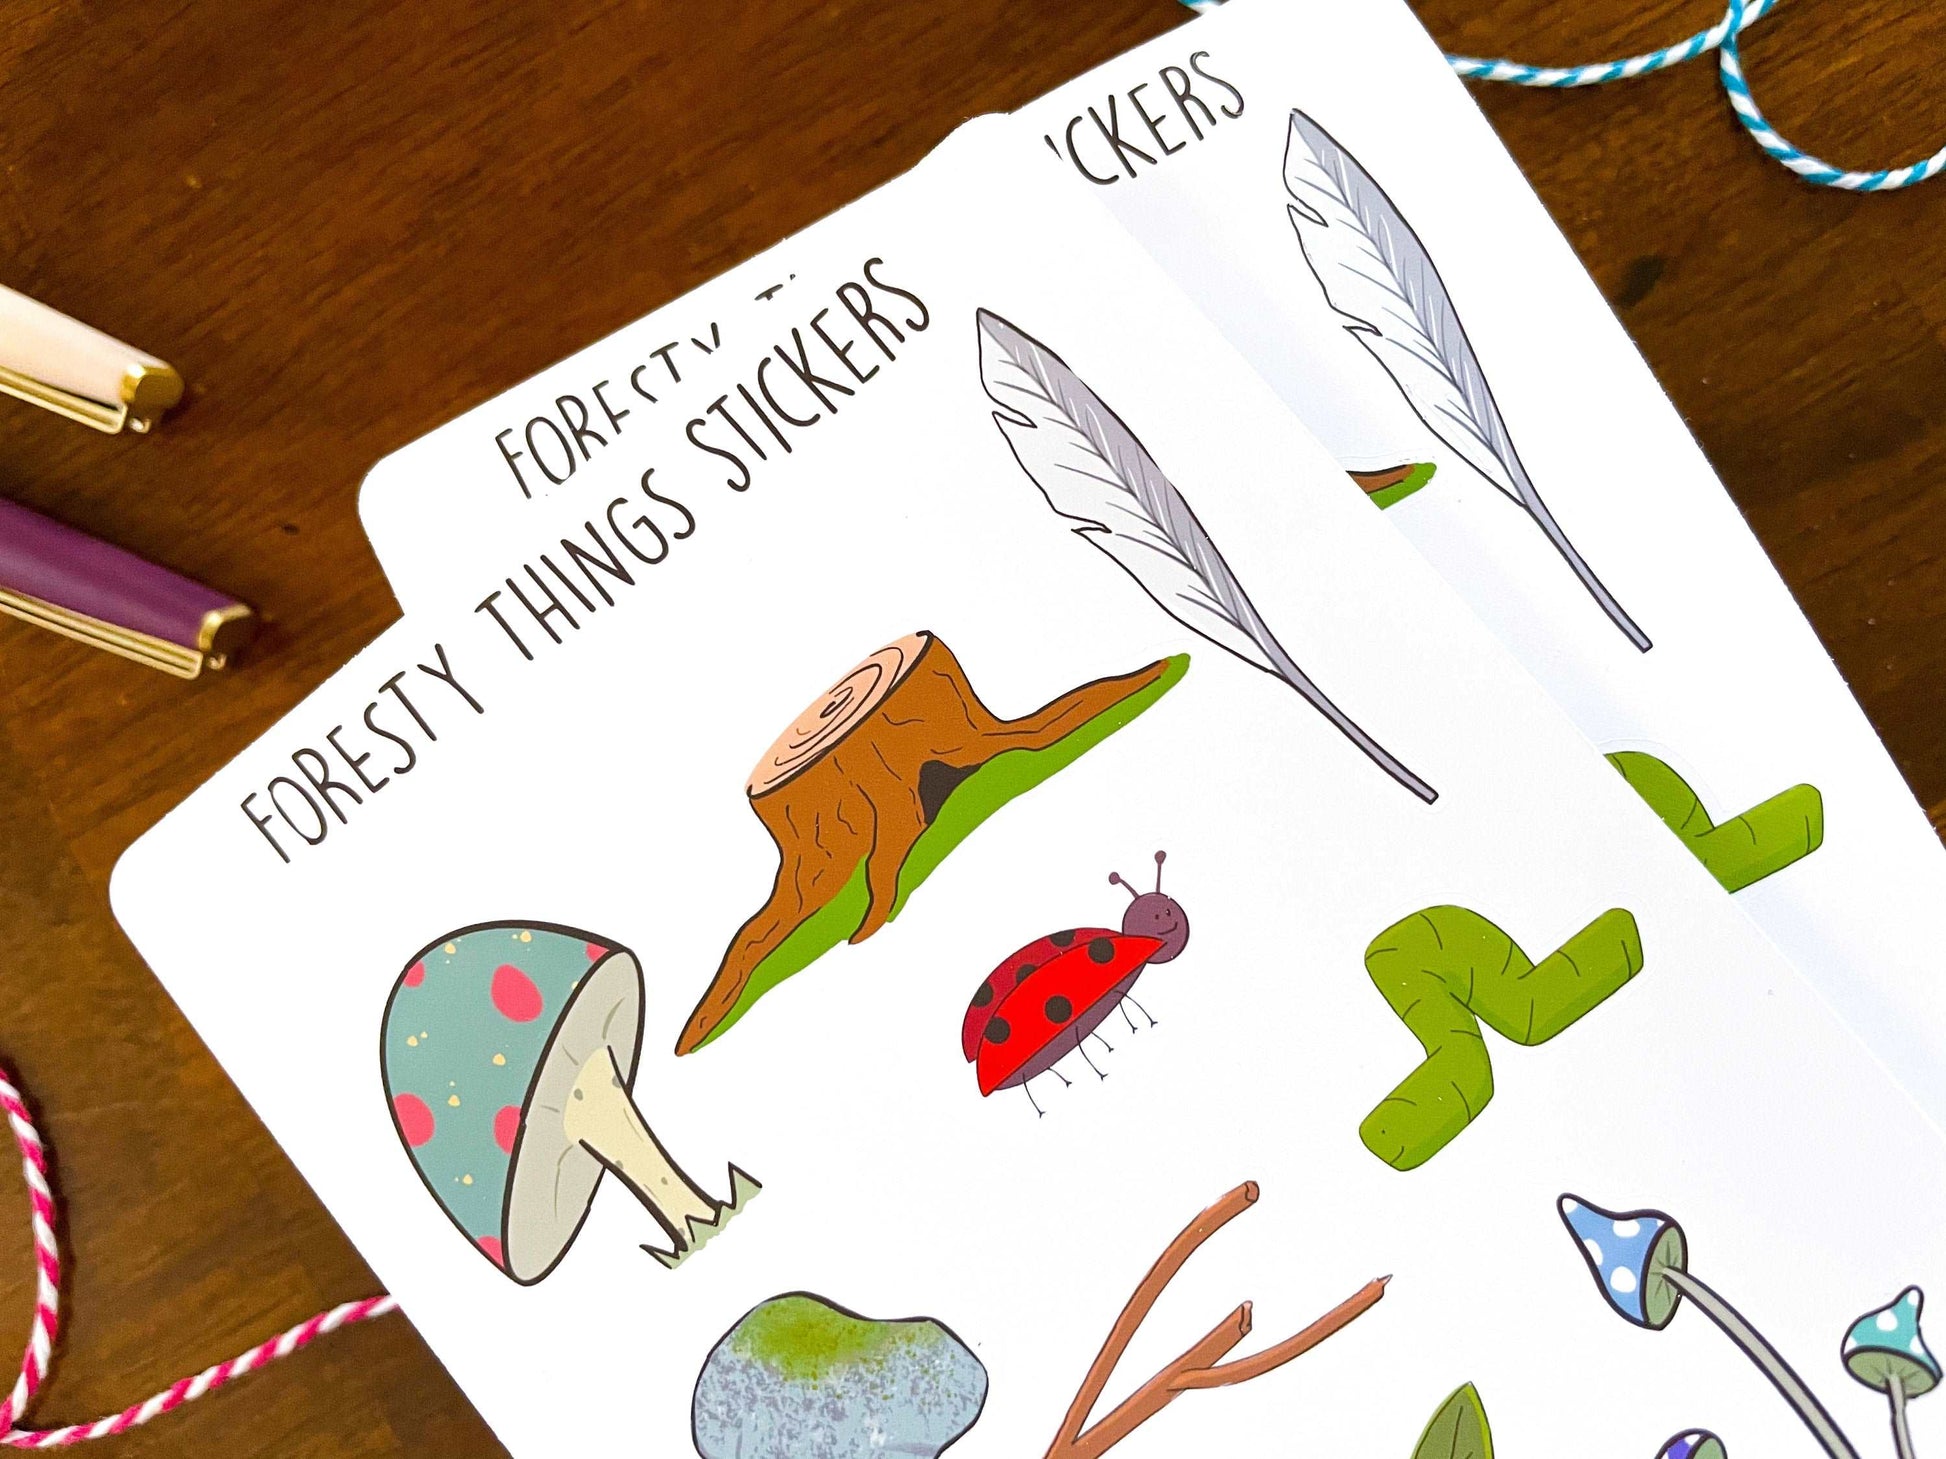 Foresty Things Woodsy Planner Sticker Sheet by StoneDonut Design